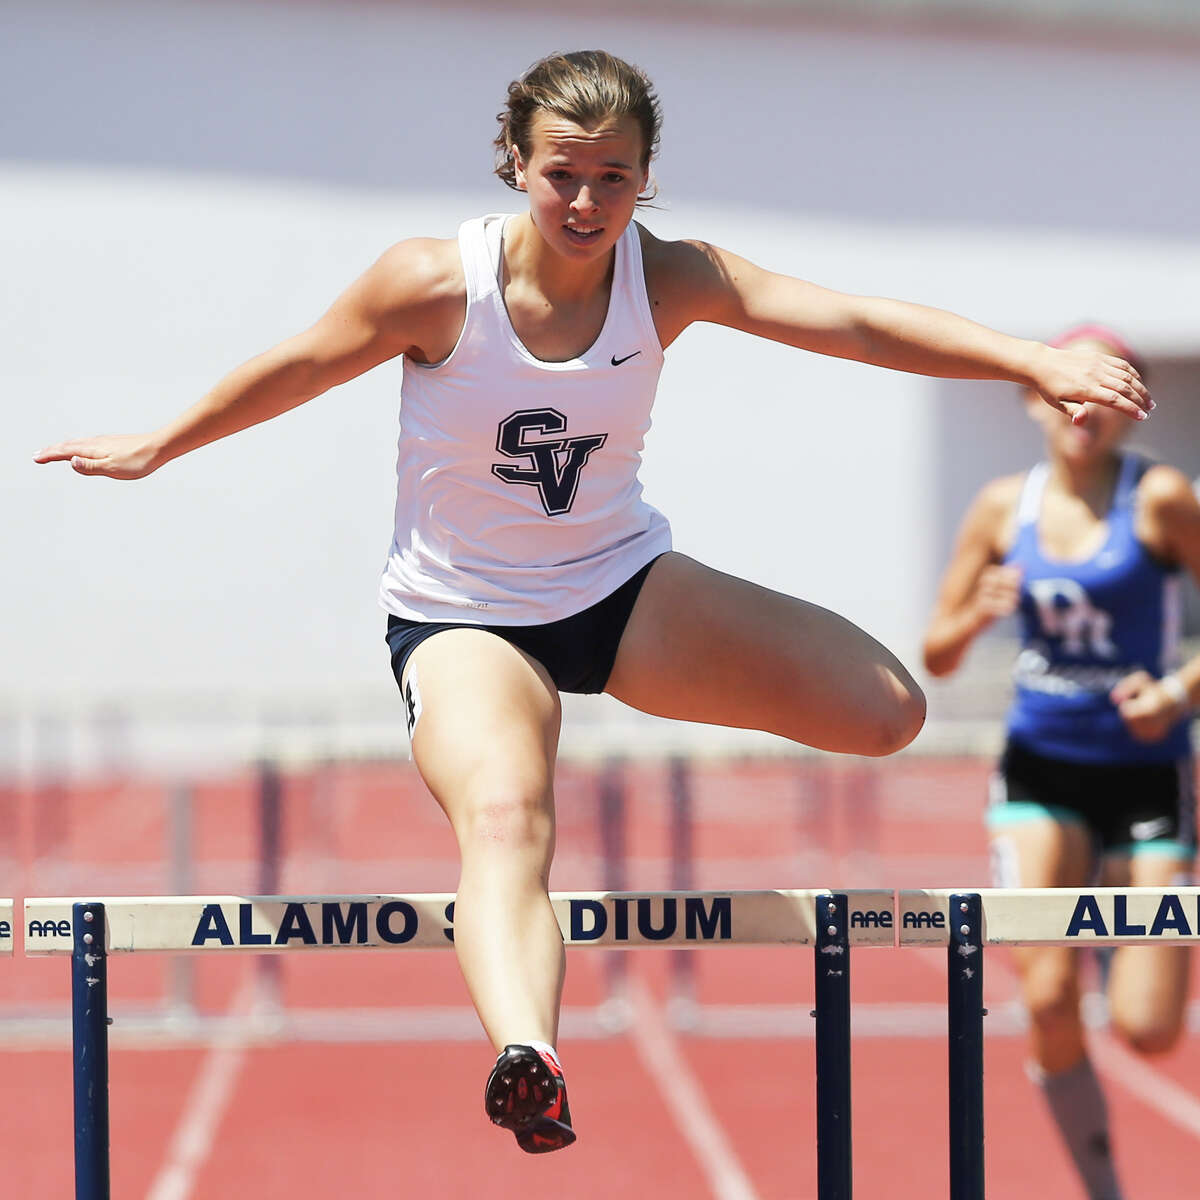 Smithson Valley’s Olivia Pappas clears the final hurdle of the 6A 300-meter hurdles during the Region IV-5A and Region IV-6A Track and Field meet at Alamo Stadium on Saturday, May 2, 2015. Pappas won the event with a time of 43.61 seconds.